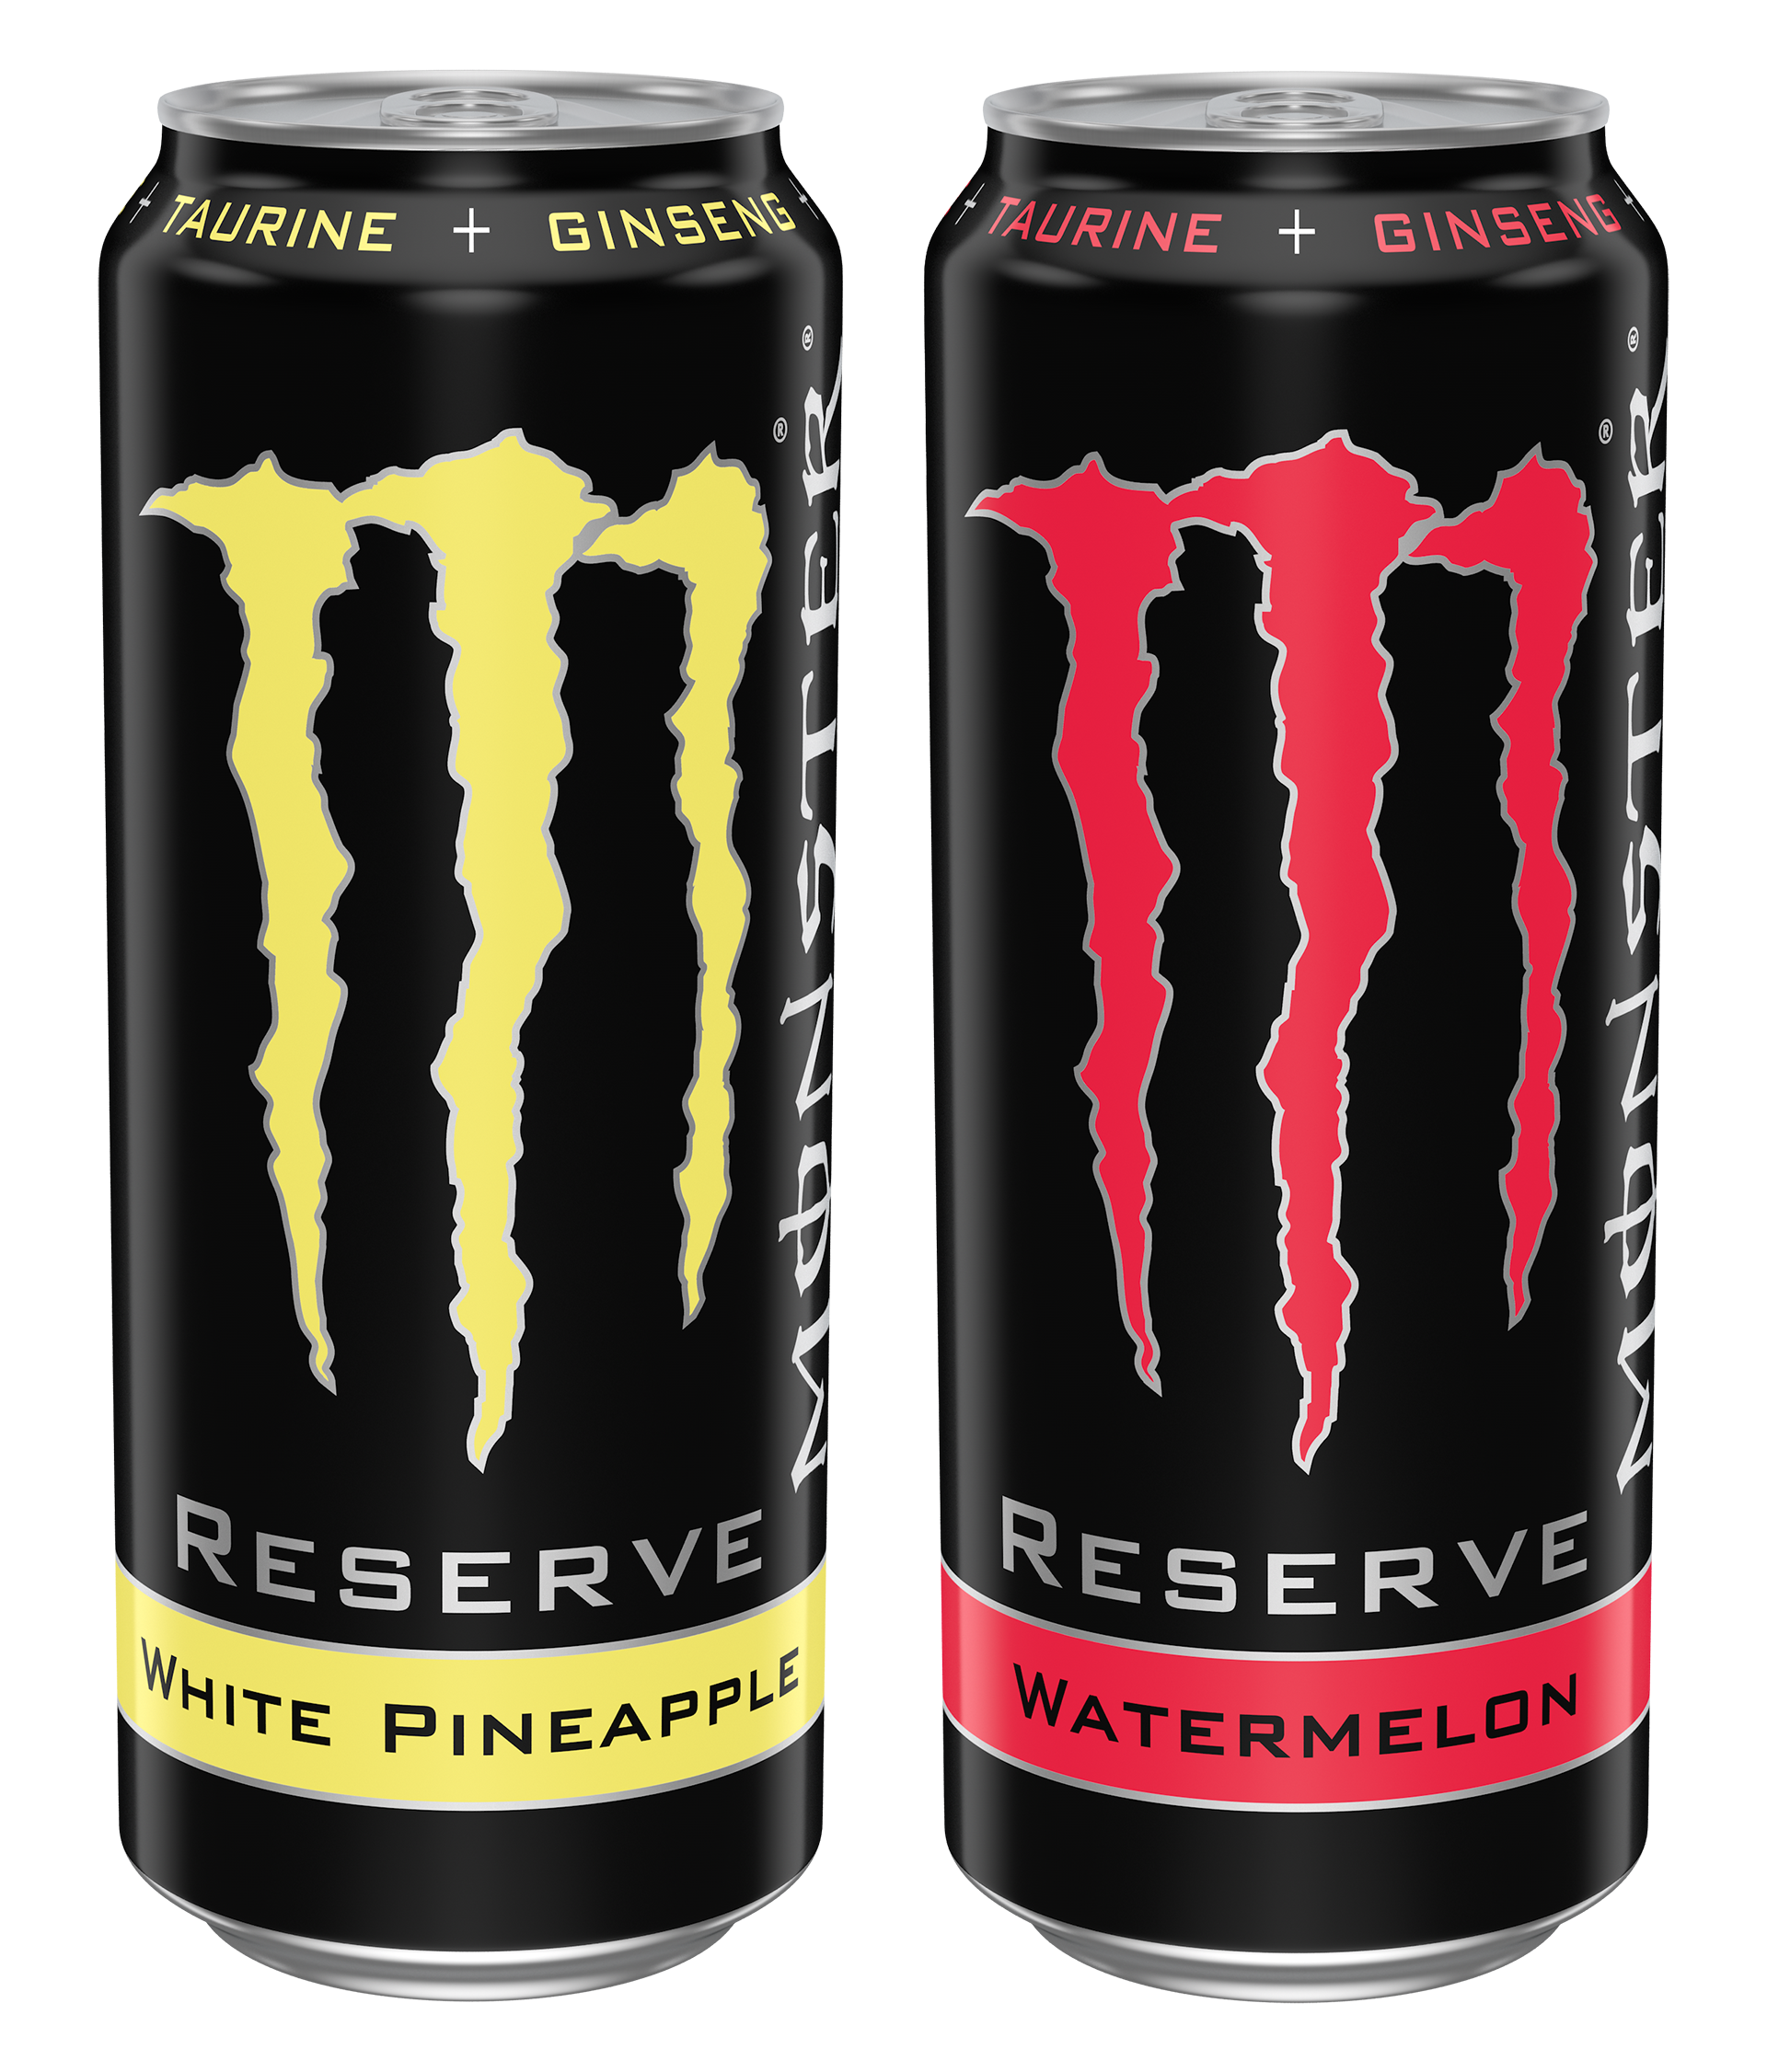 Monster adds more flavour to energy category with two new variants